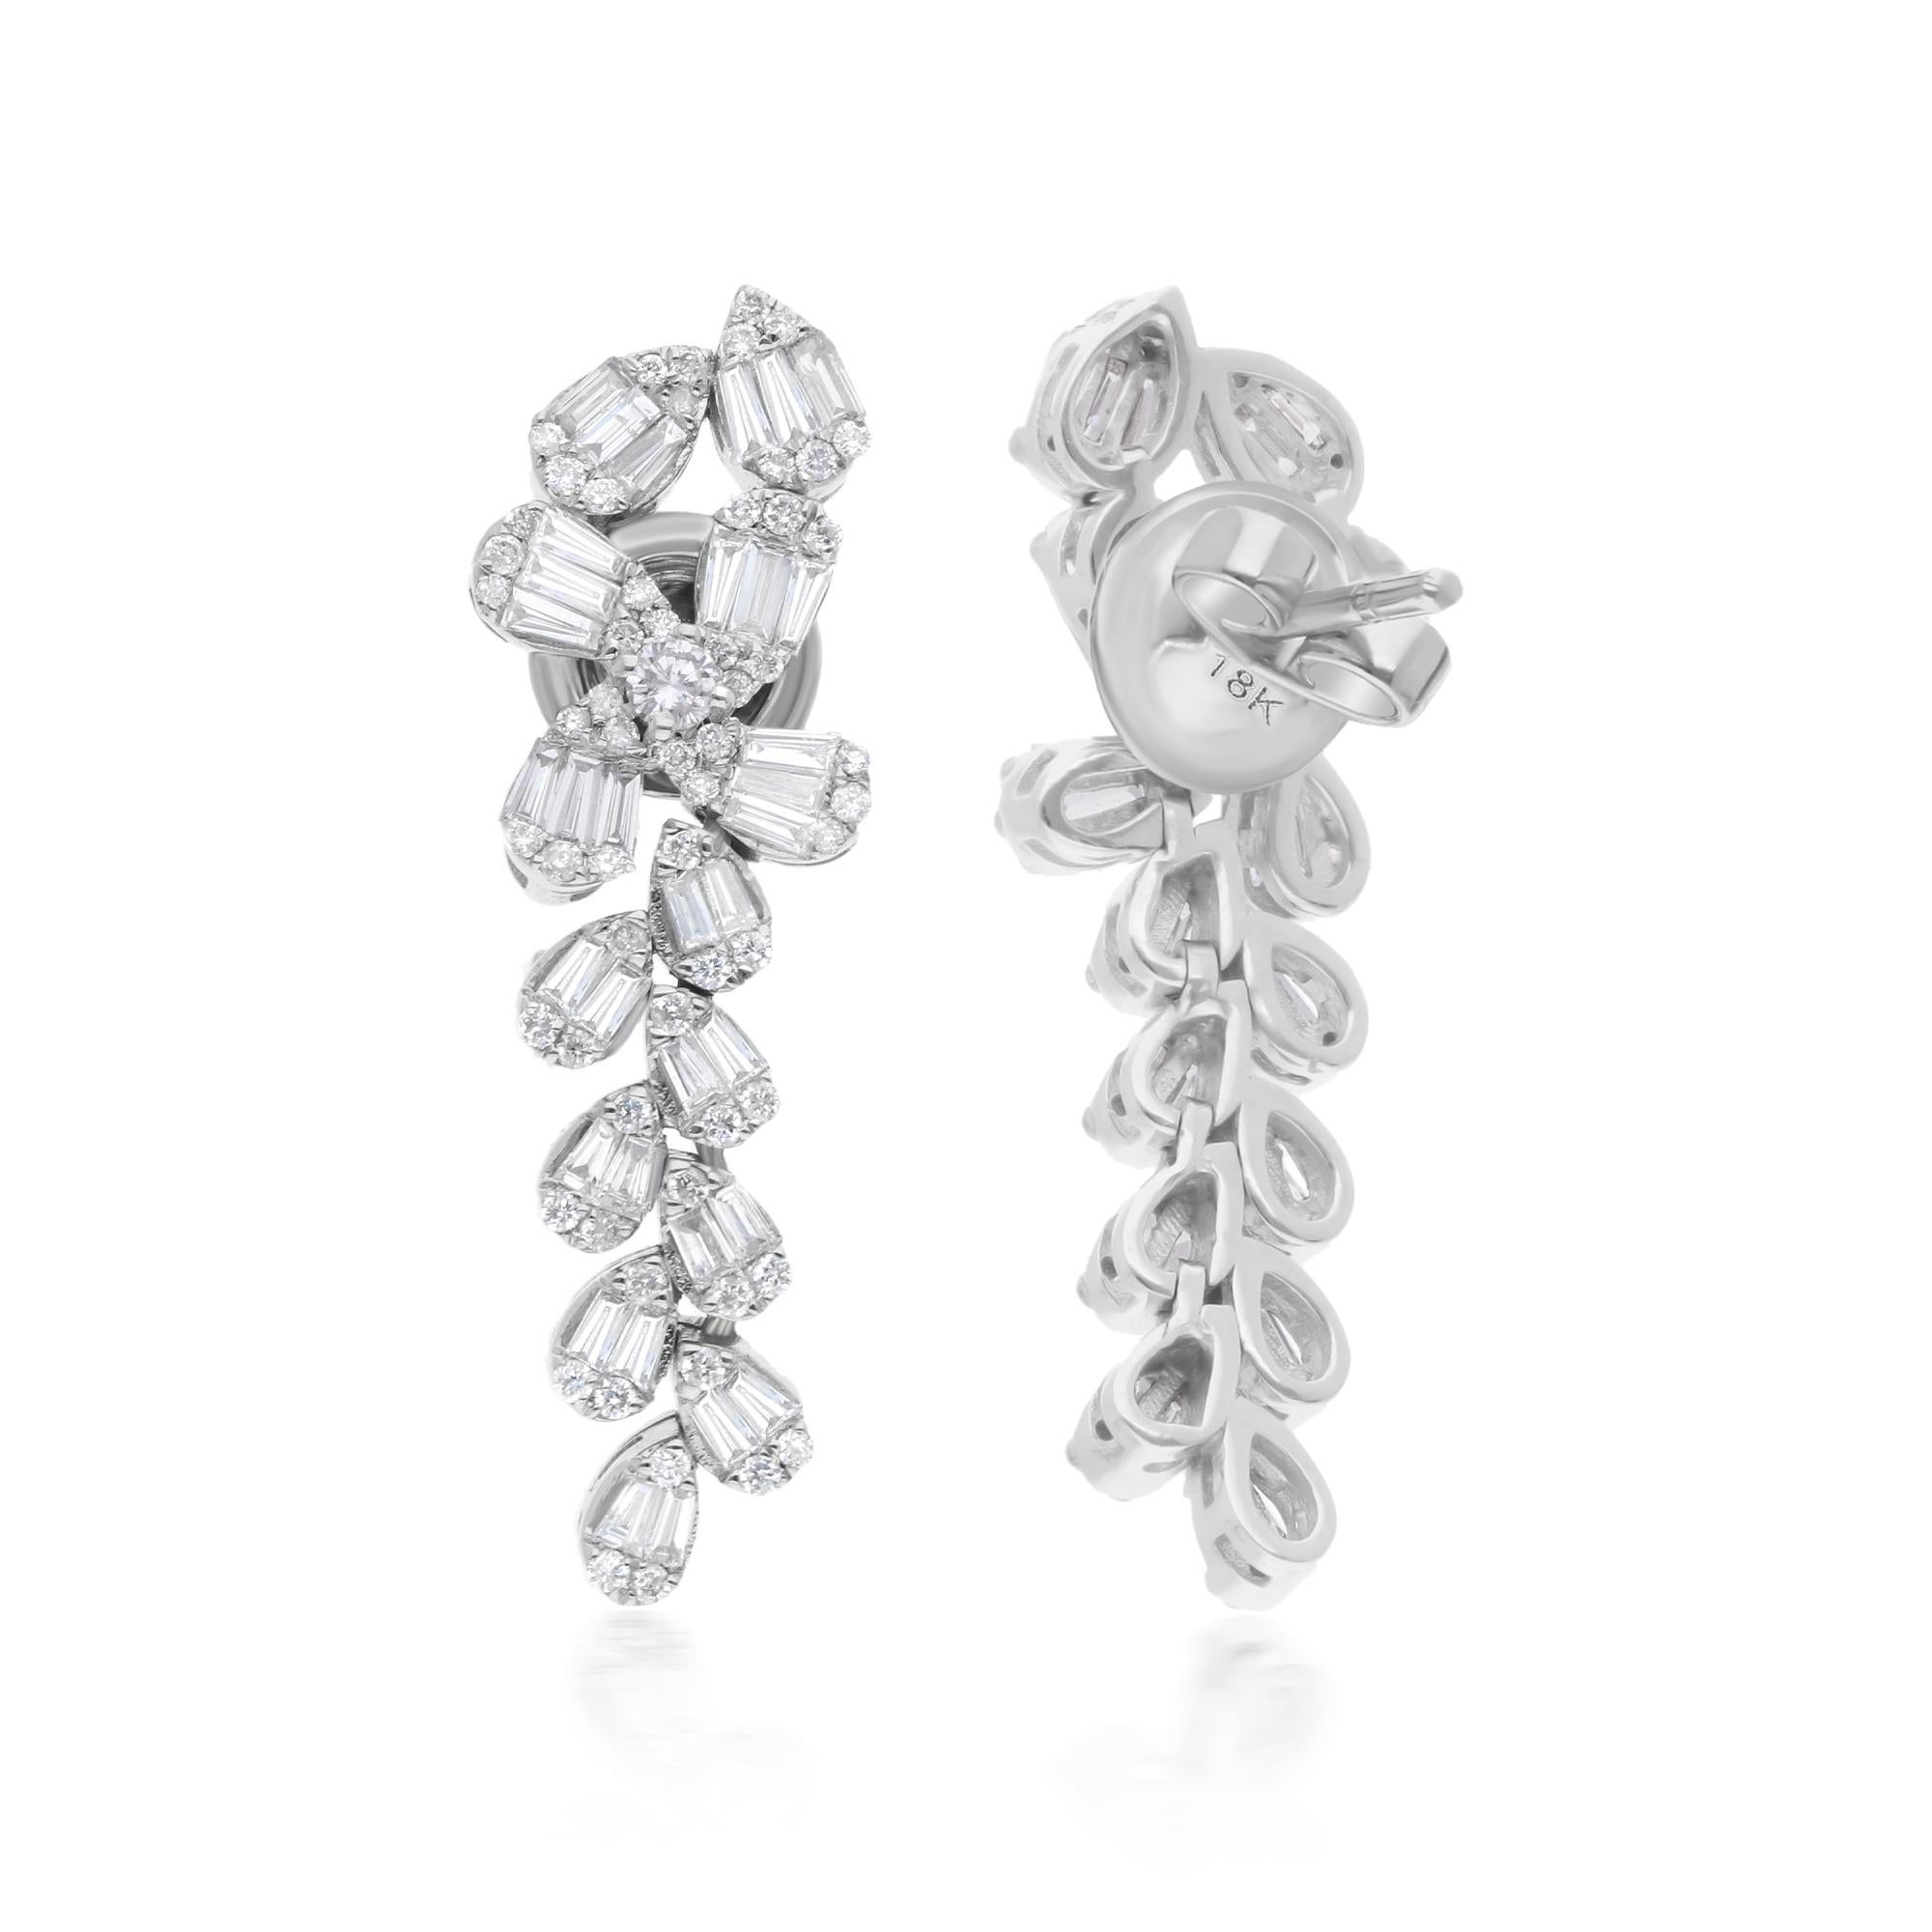 At the center of each earring, a radiant array of baguette and round diamonds takes center stage, meticulously arranged to create a captivating dangle design. The sleek elegance of the baguette diamonds is complemented by the timeless brilliance of